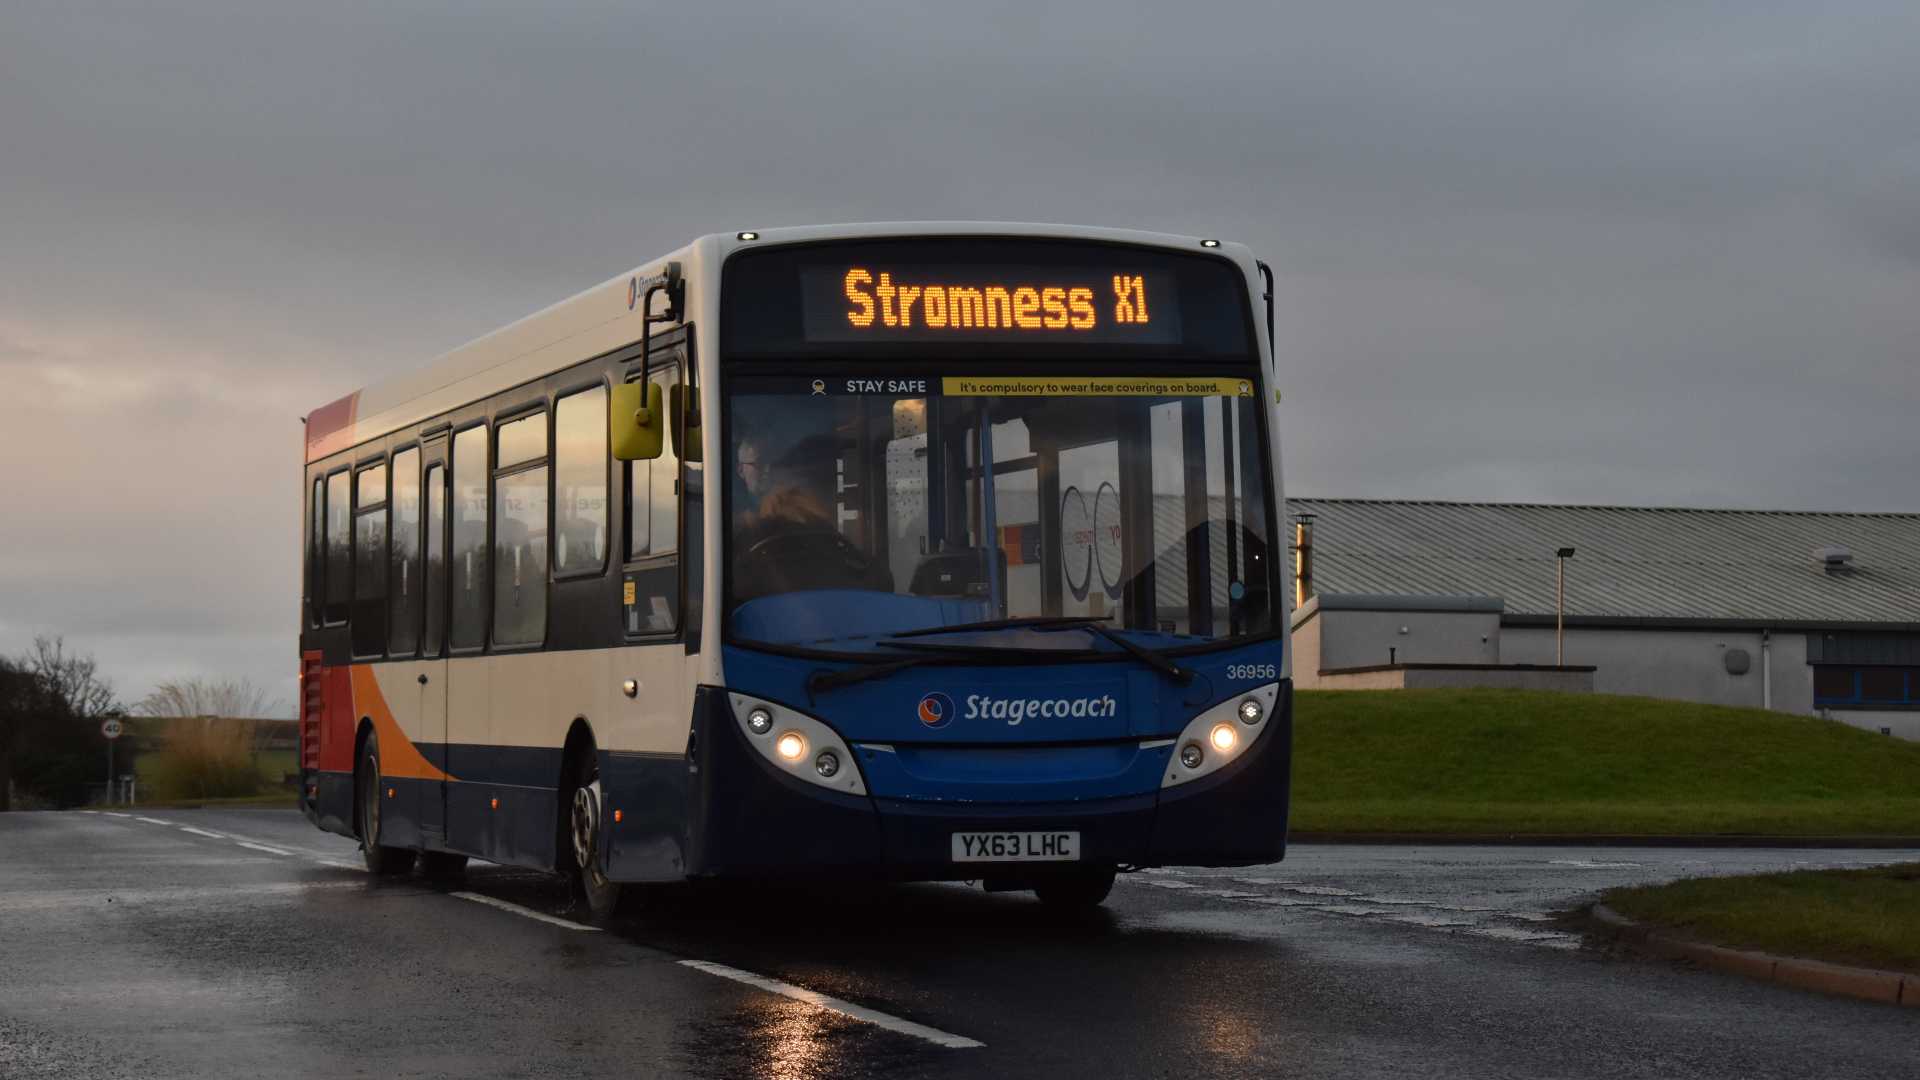 Enviro 200 36956 heading out on an X1 to Stromness